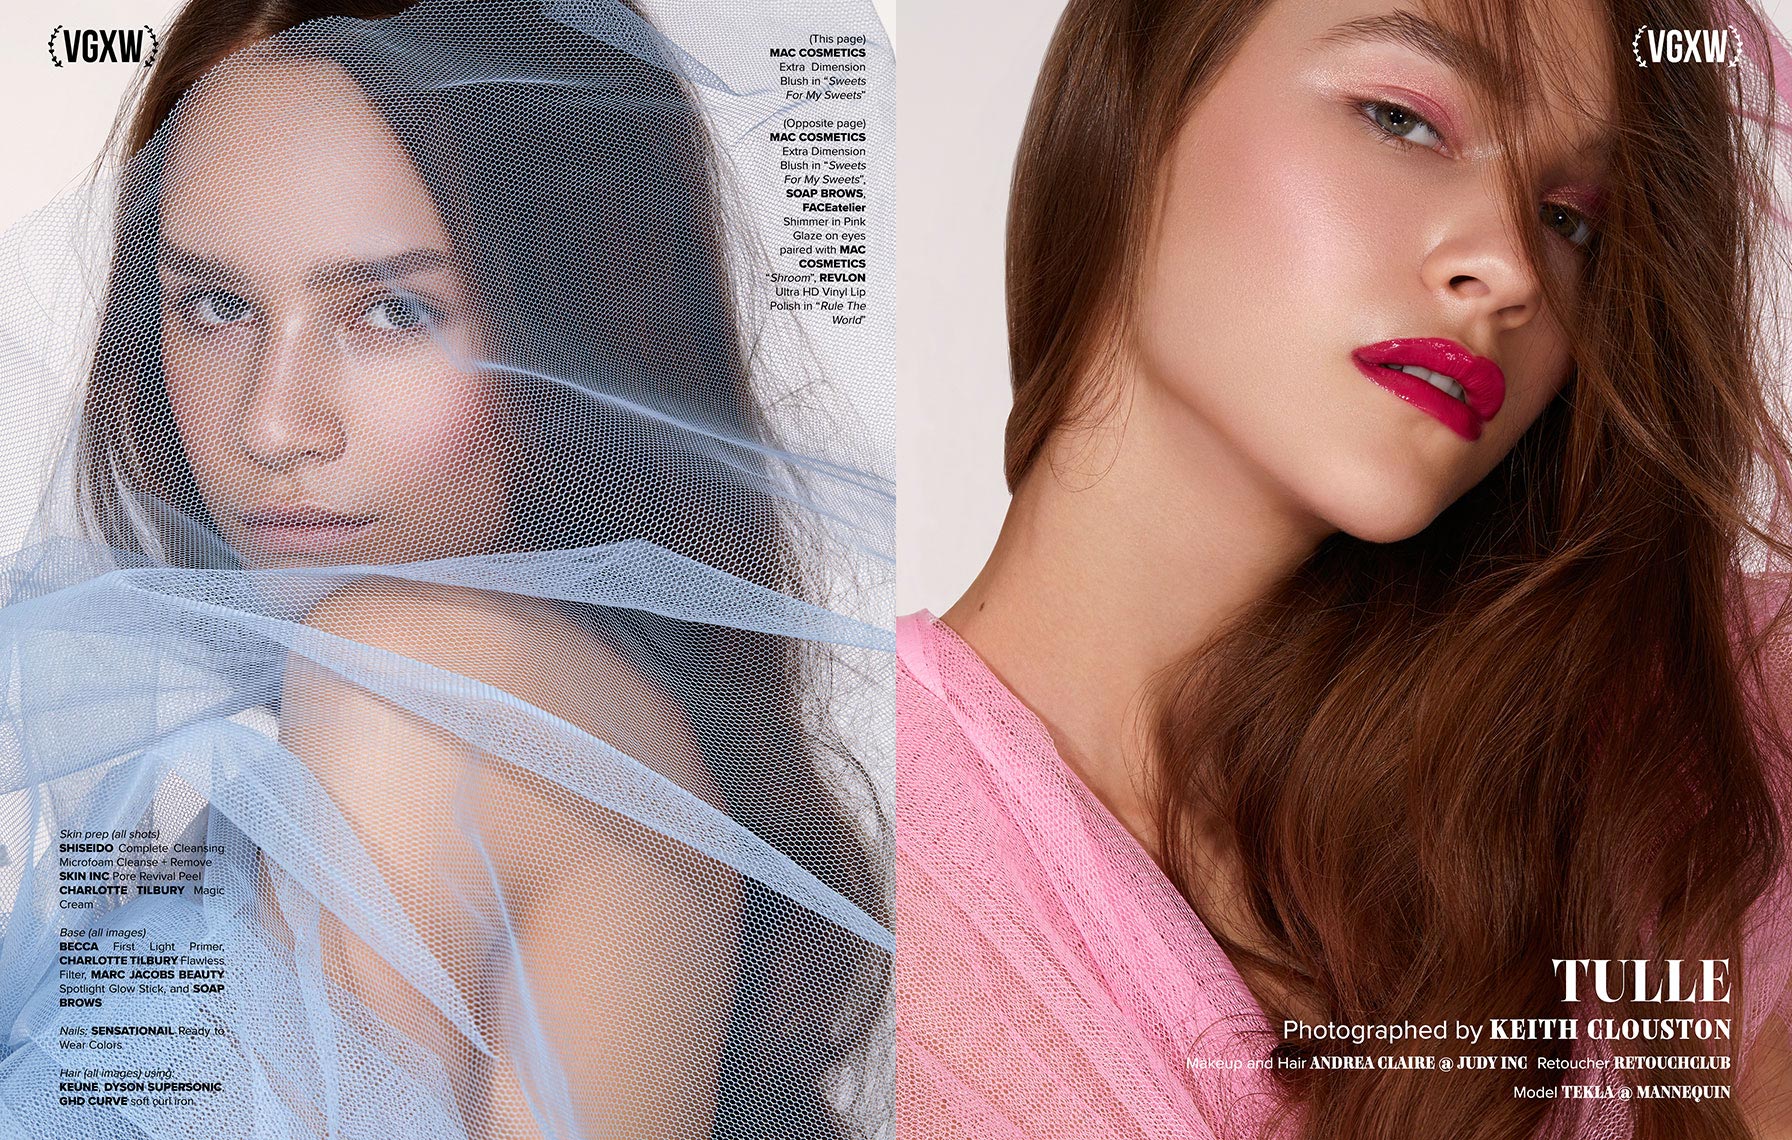 vgxw-magazine_december-2019_book-2_tulle_Page_2